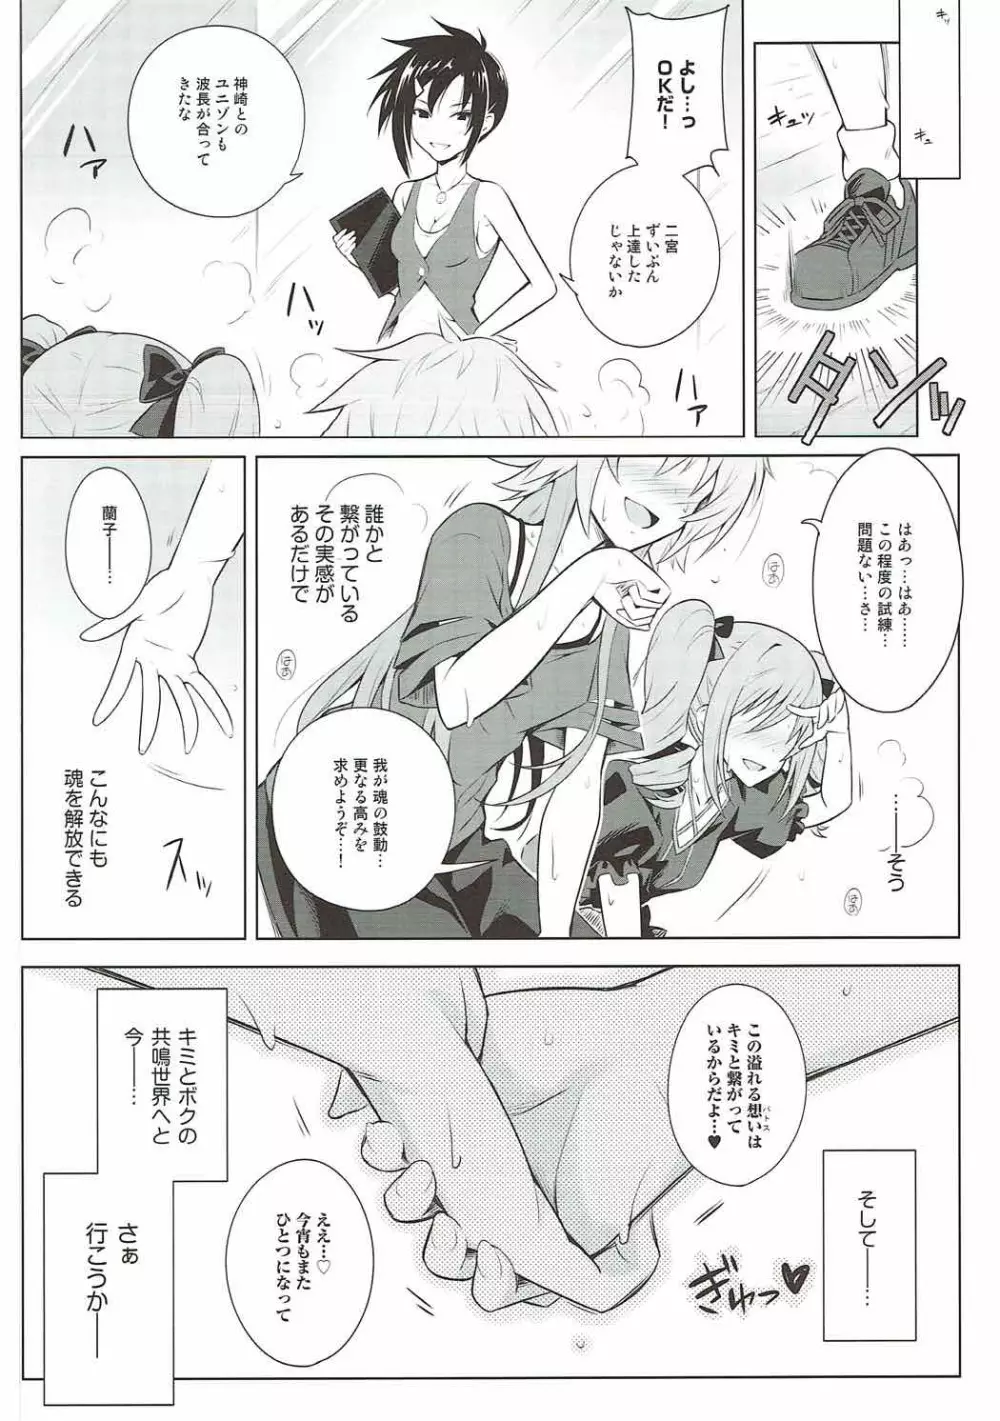 The Resonant Notes -共鳴世界の旋律符牒- Page.19